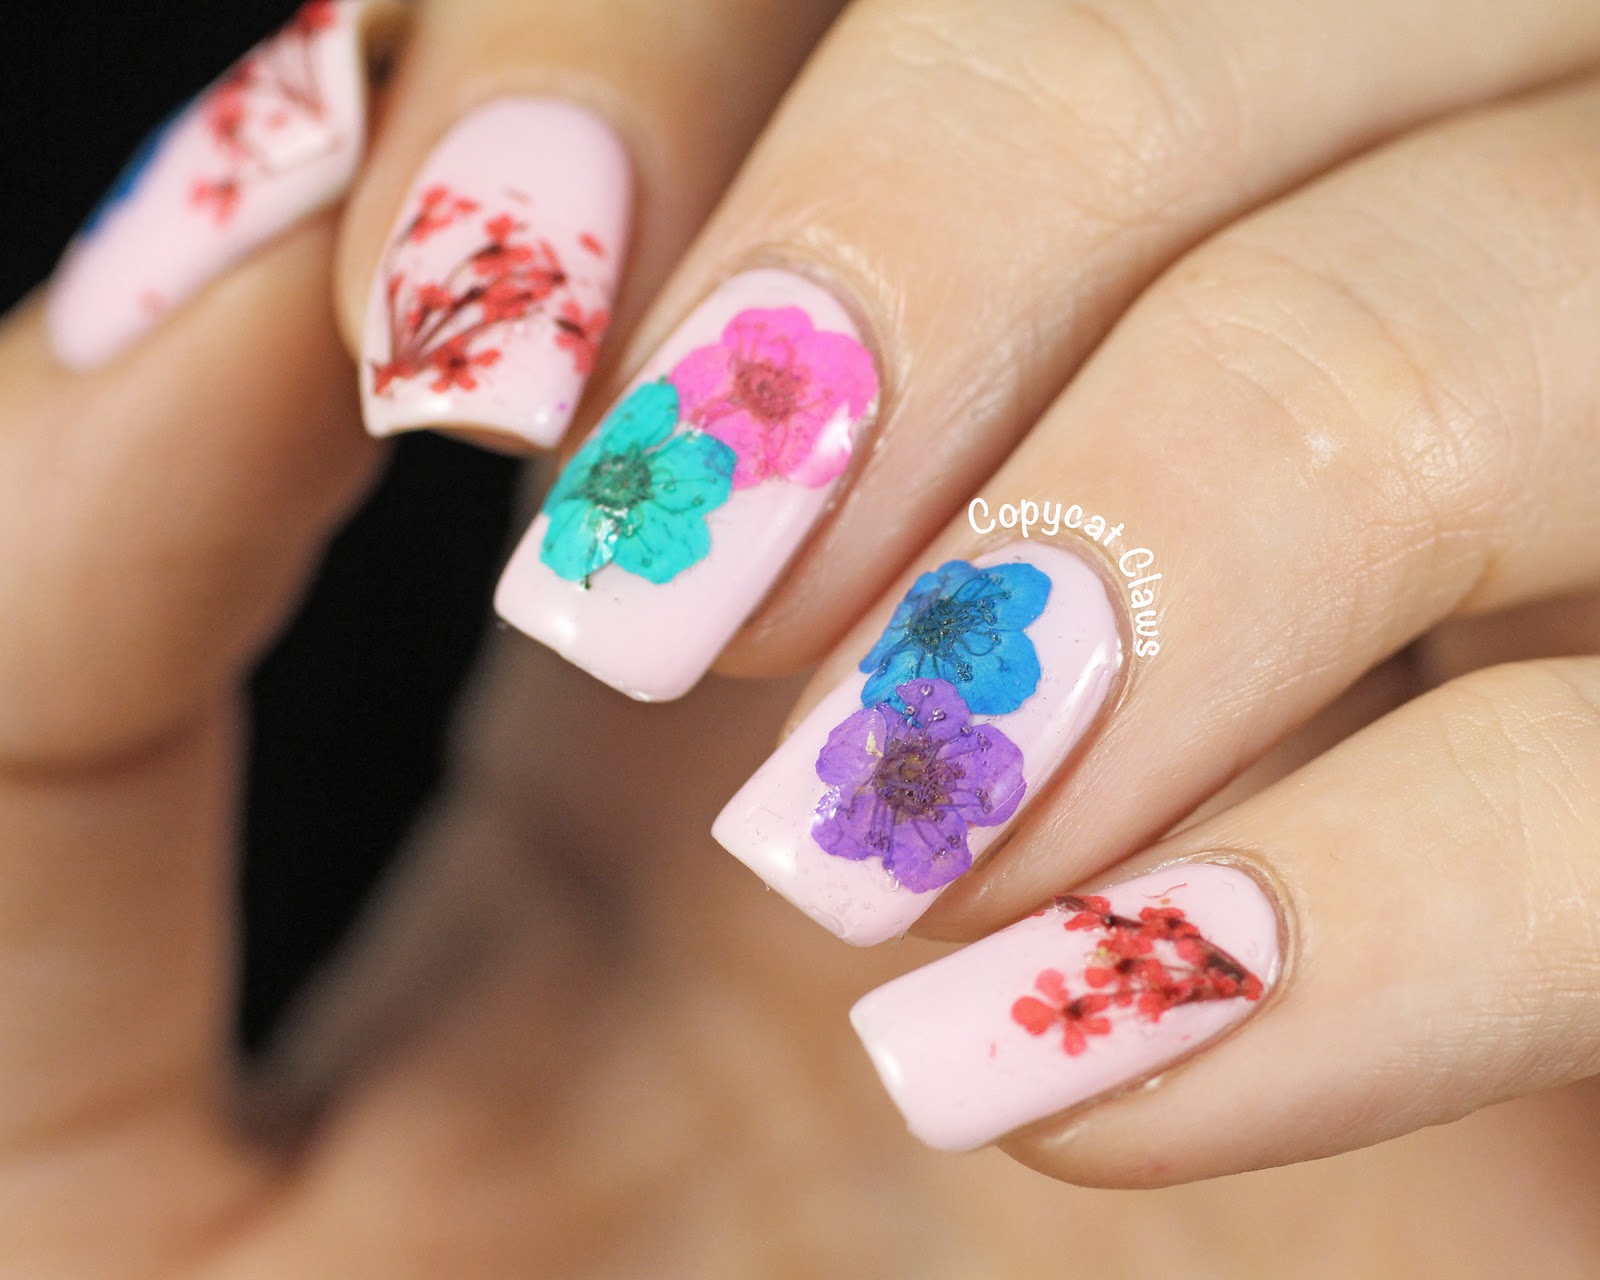 2. 10 Best Dried Flowers for Nail Art - wide 7